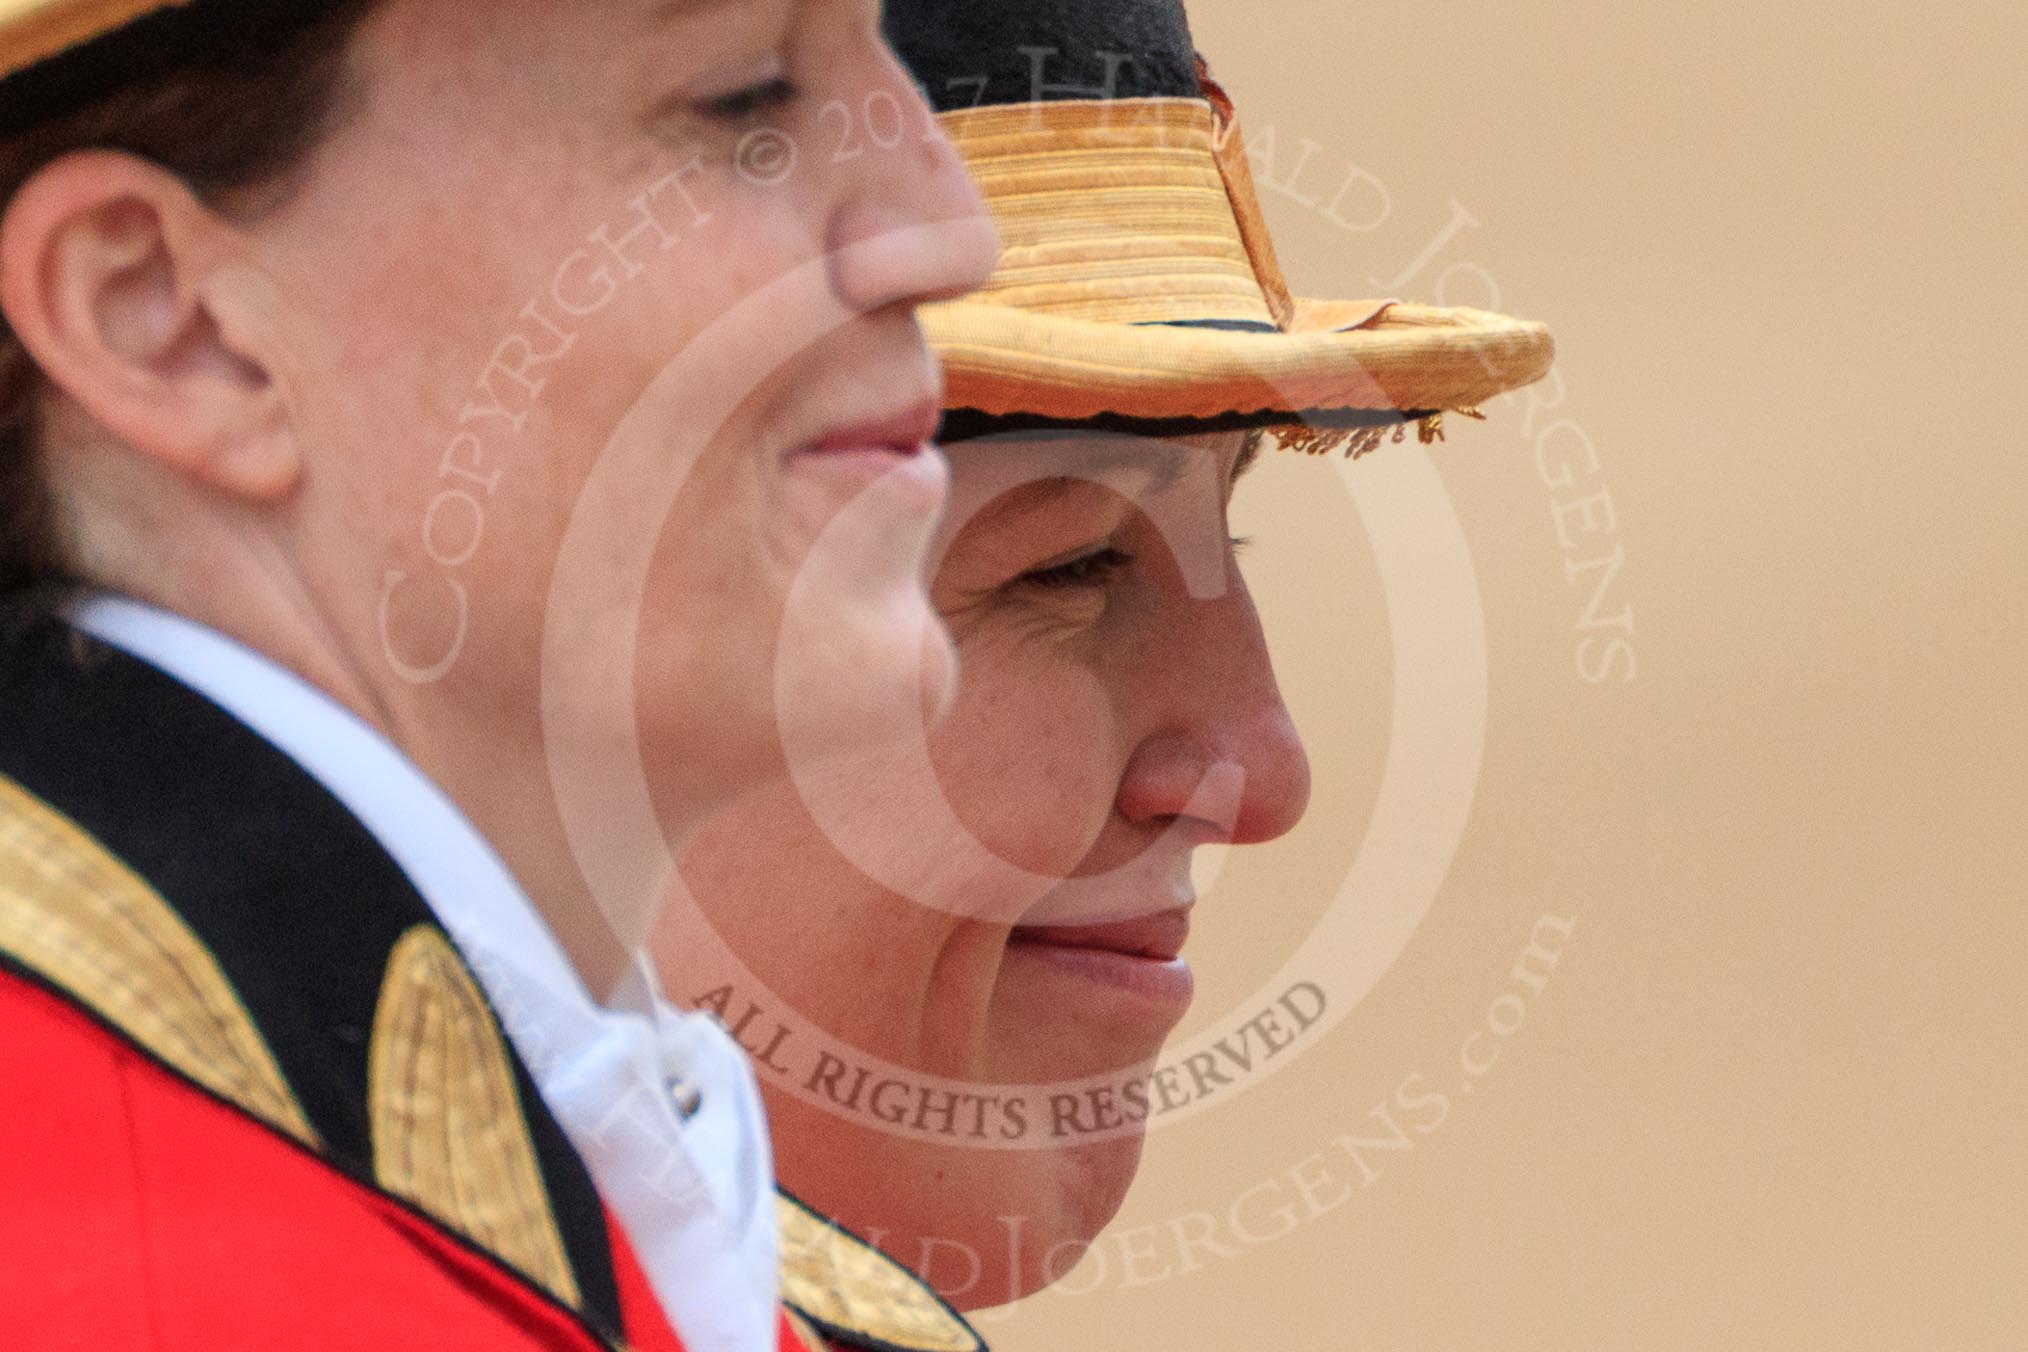 during The Colonel's Review {iptcyear4} (final rehearsal for Trooping the Colour, The Queen's Birthday Parade)  at Horse Guards Parade, Westminster, London, 2 June 2018, 10:51.